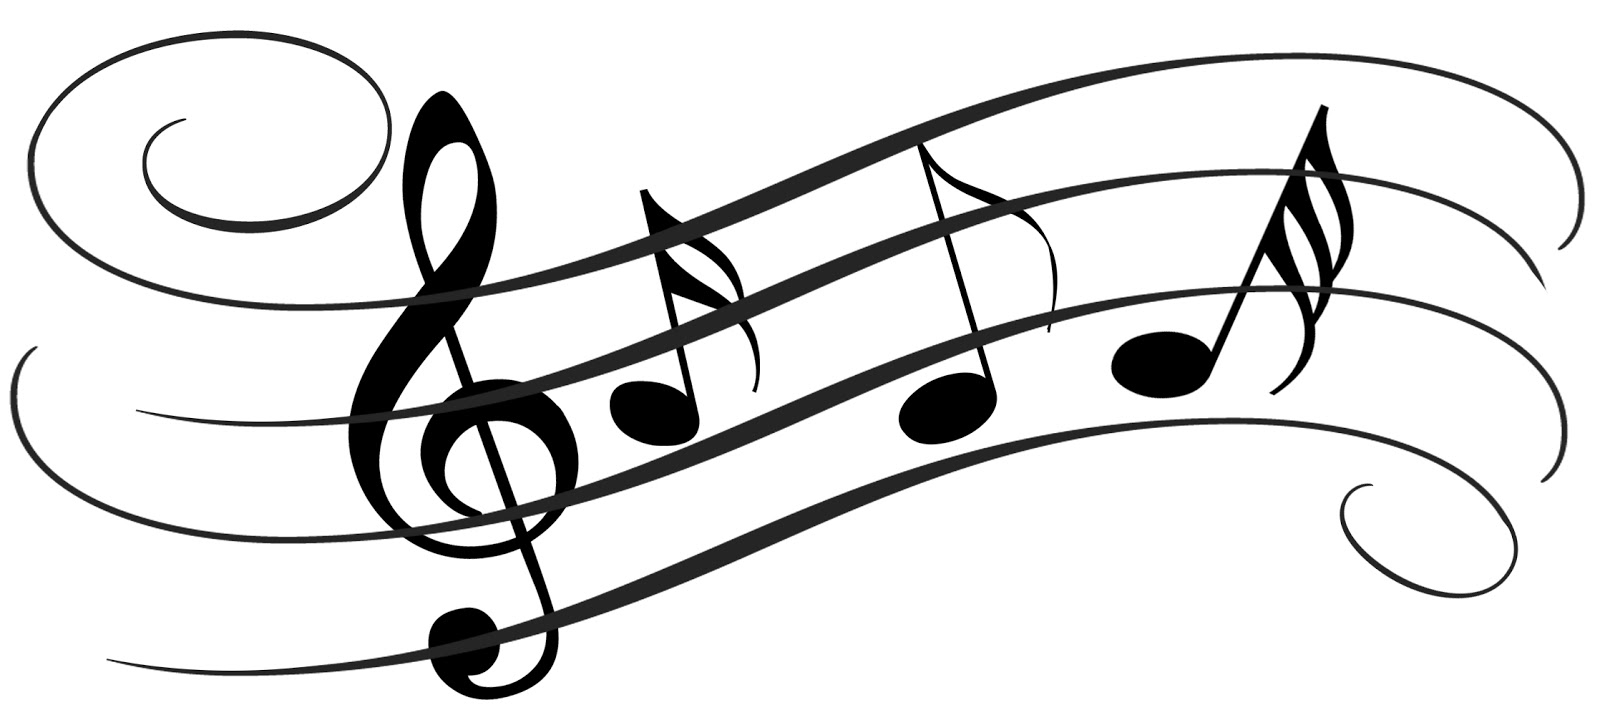 flutes clipart music note